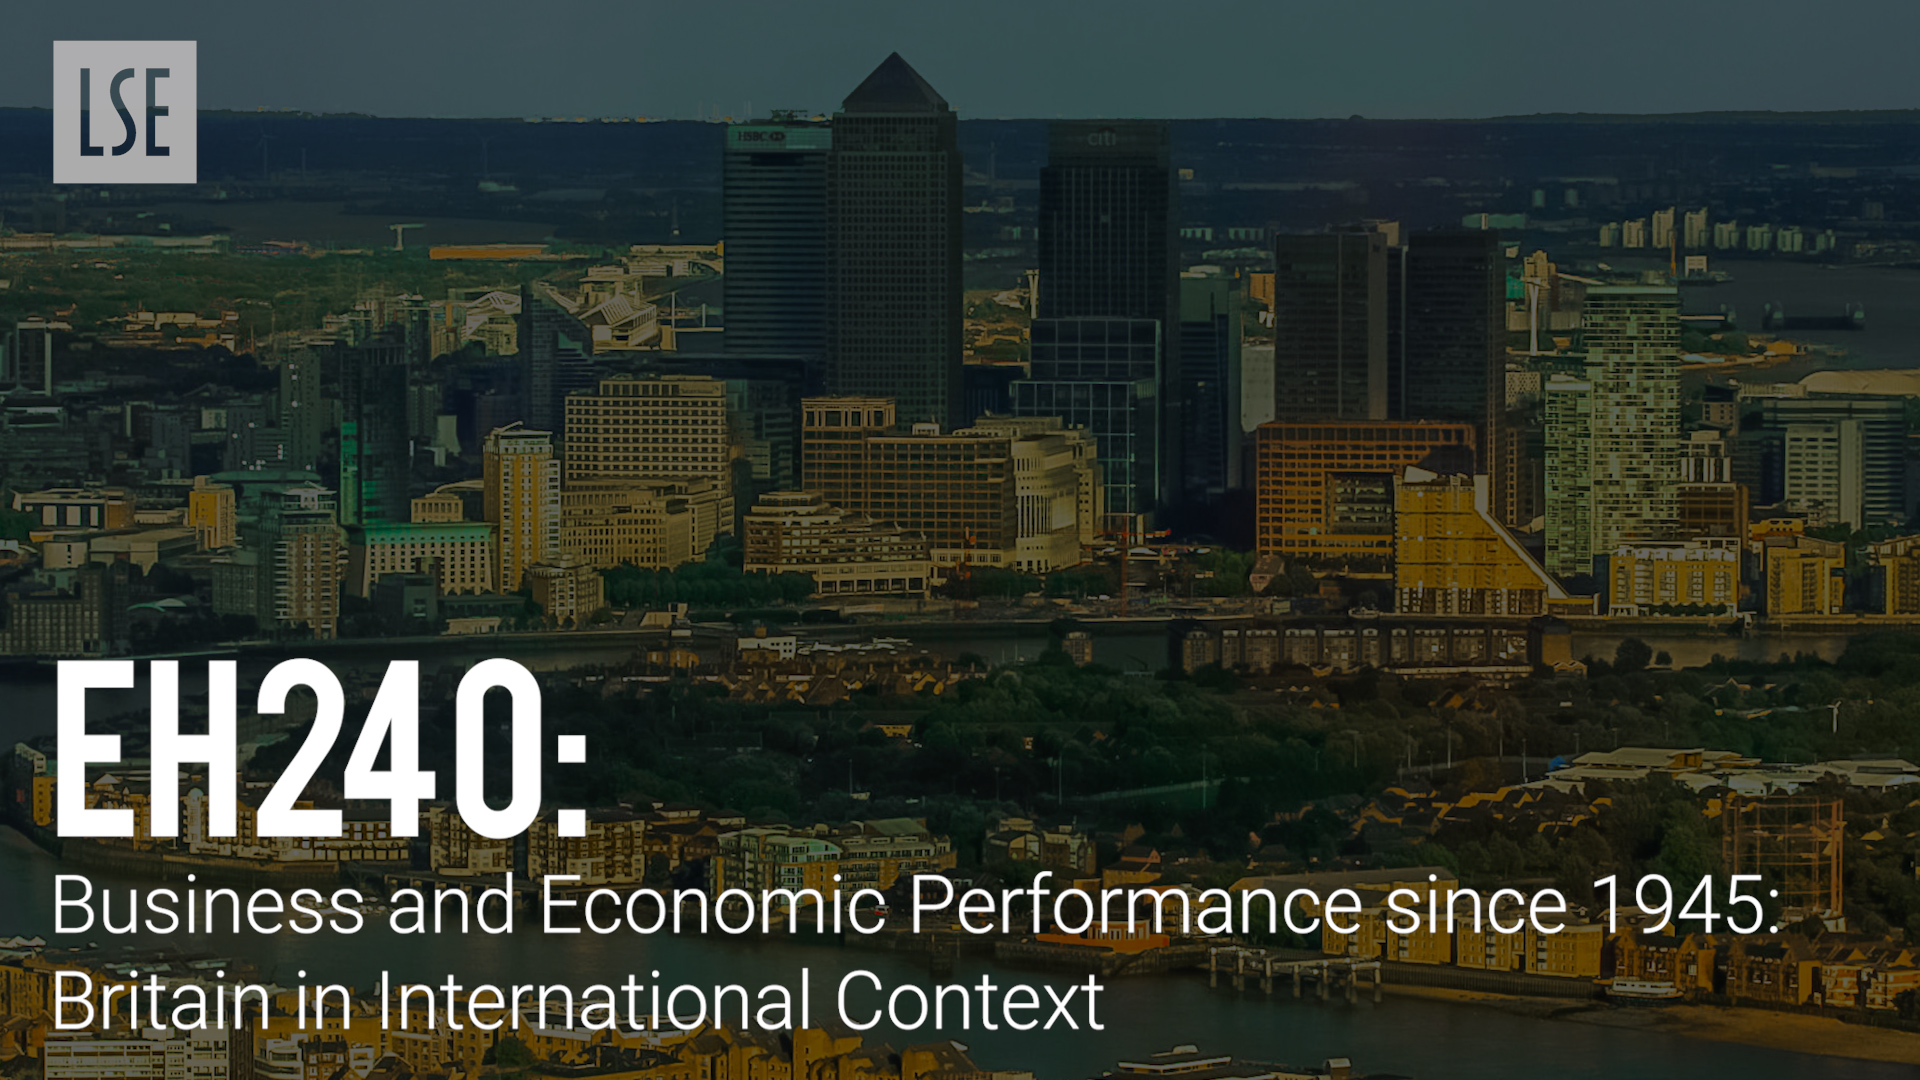 EH240 - Business and Economic Performance since 1945: Britain in International Context, by Dr Peter Cirenza